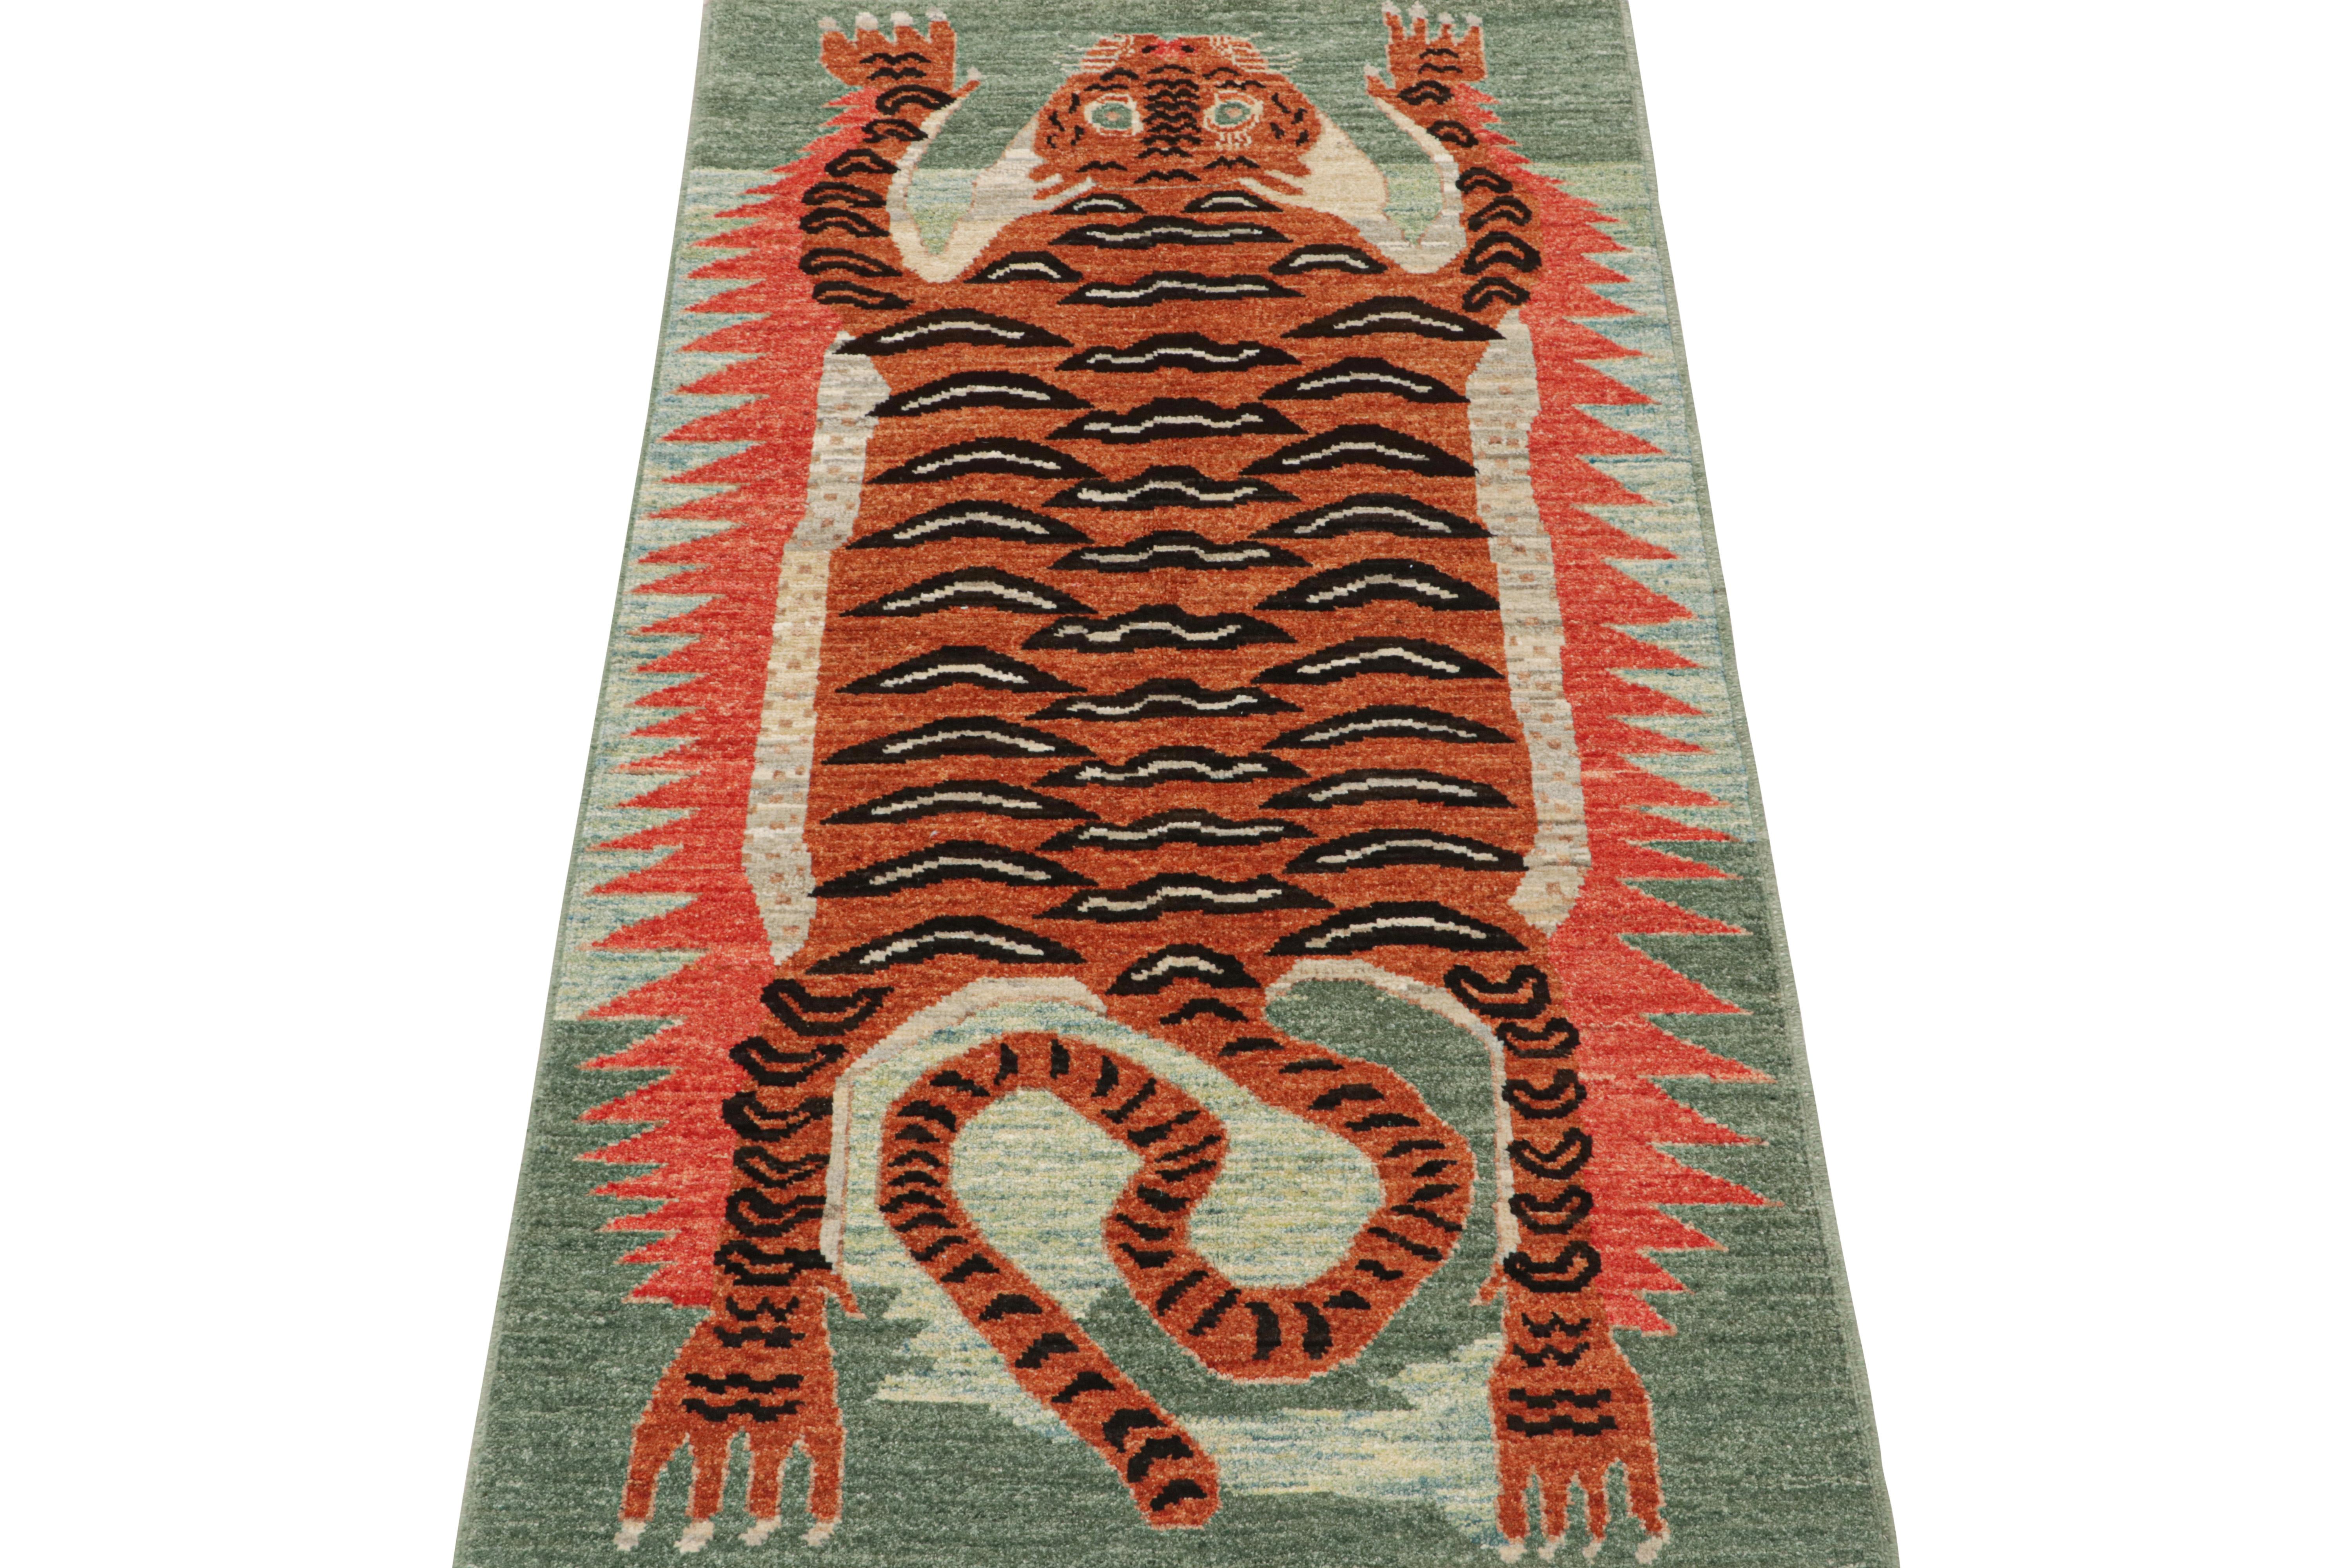 This contemporary 3x6 runner is a bold new addition to Rug & Kilim’s Tigers Collection. Our collection spans several cultures and recaptures iconic pictorial styles in folk art and handmade Oriental rugs alike. 

Further on the Design:

This